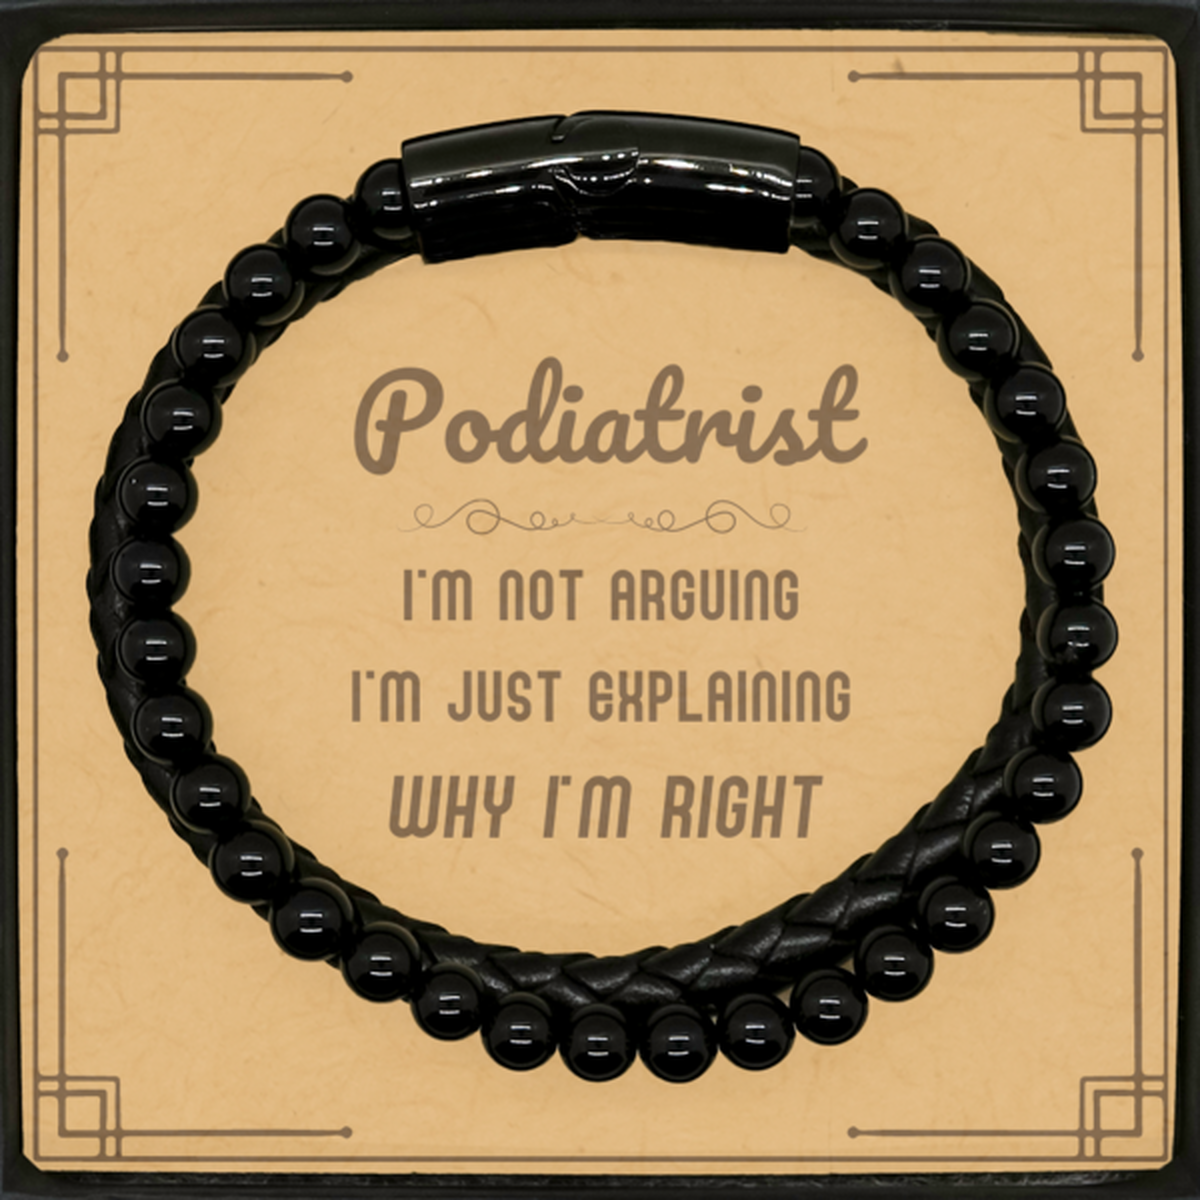 Podiatrist I'm not Arguing. I'm Just Explaining Why I'm RIGHT Stone Leather Bracelets, Funny Saying Quote Podiatrist Gifts For Podiatrist Message Card Graduation Birthday Christmas Gifts for Men Women Coworker